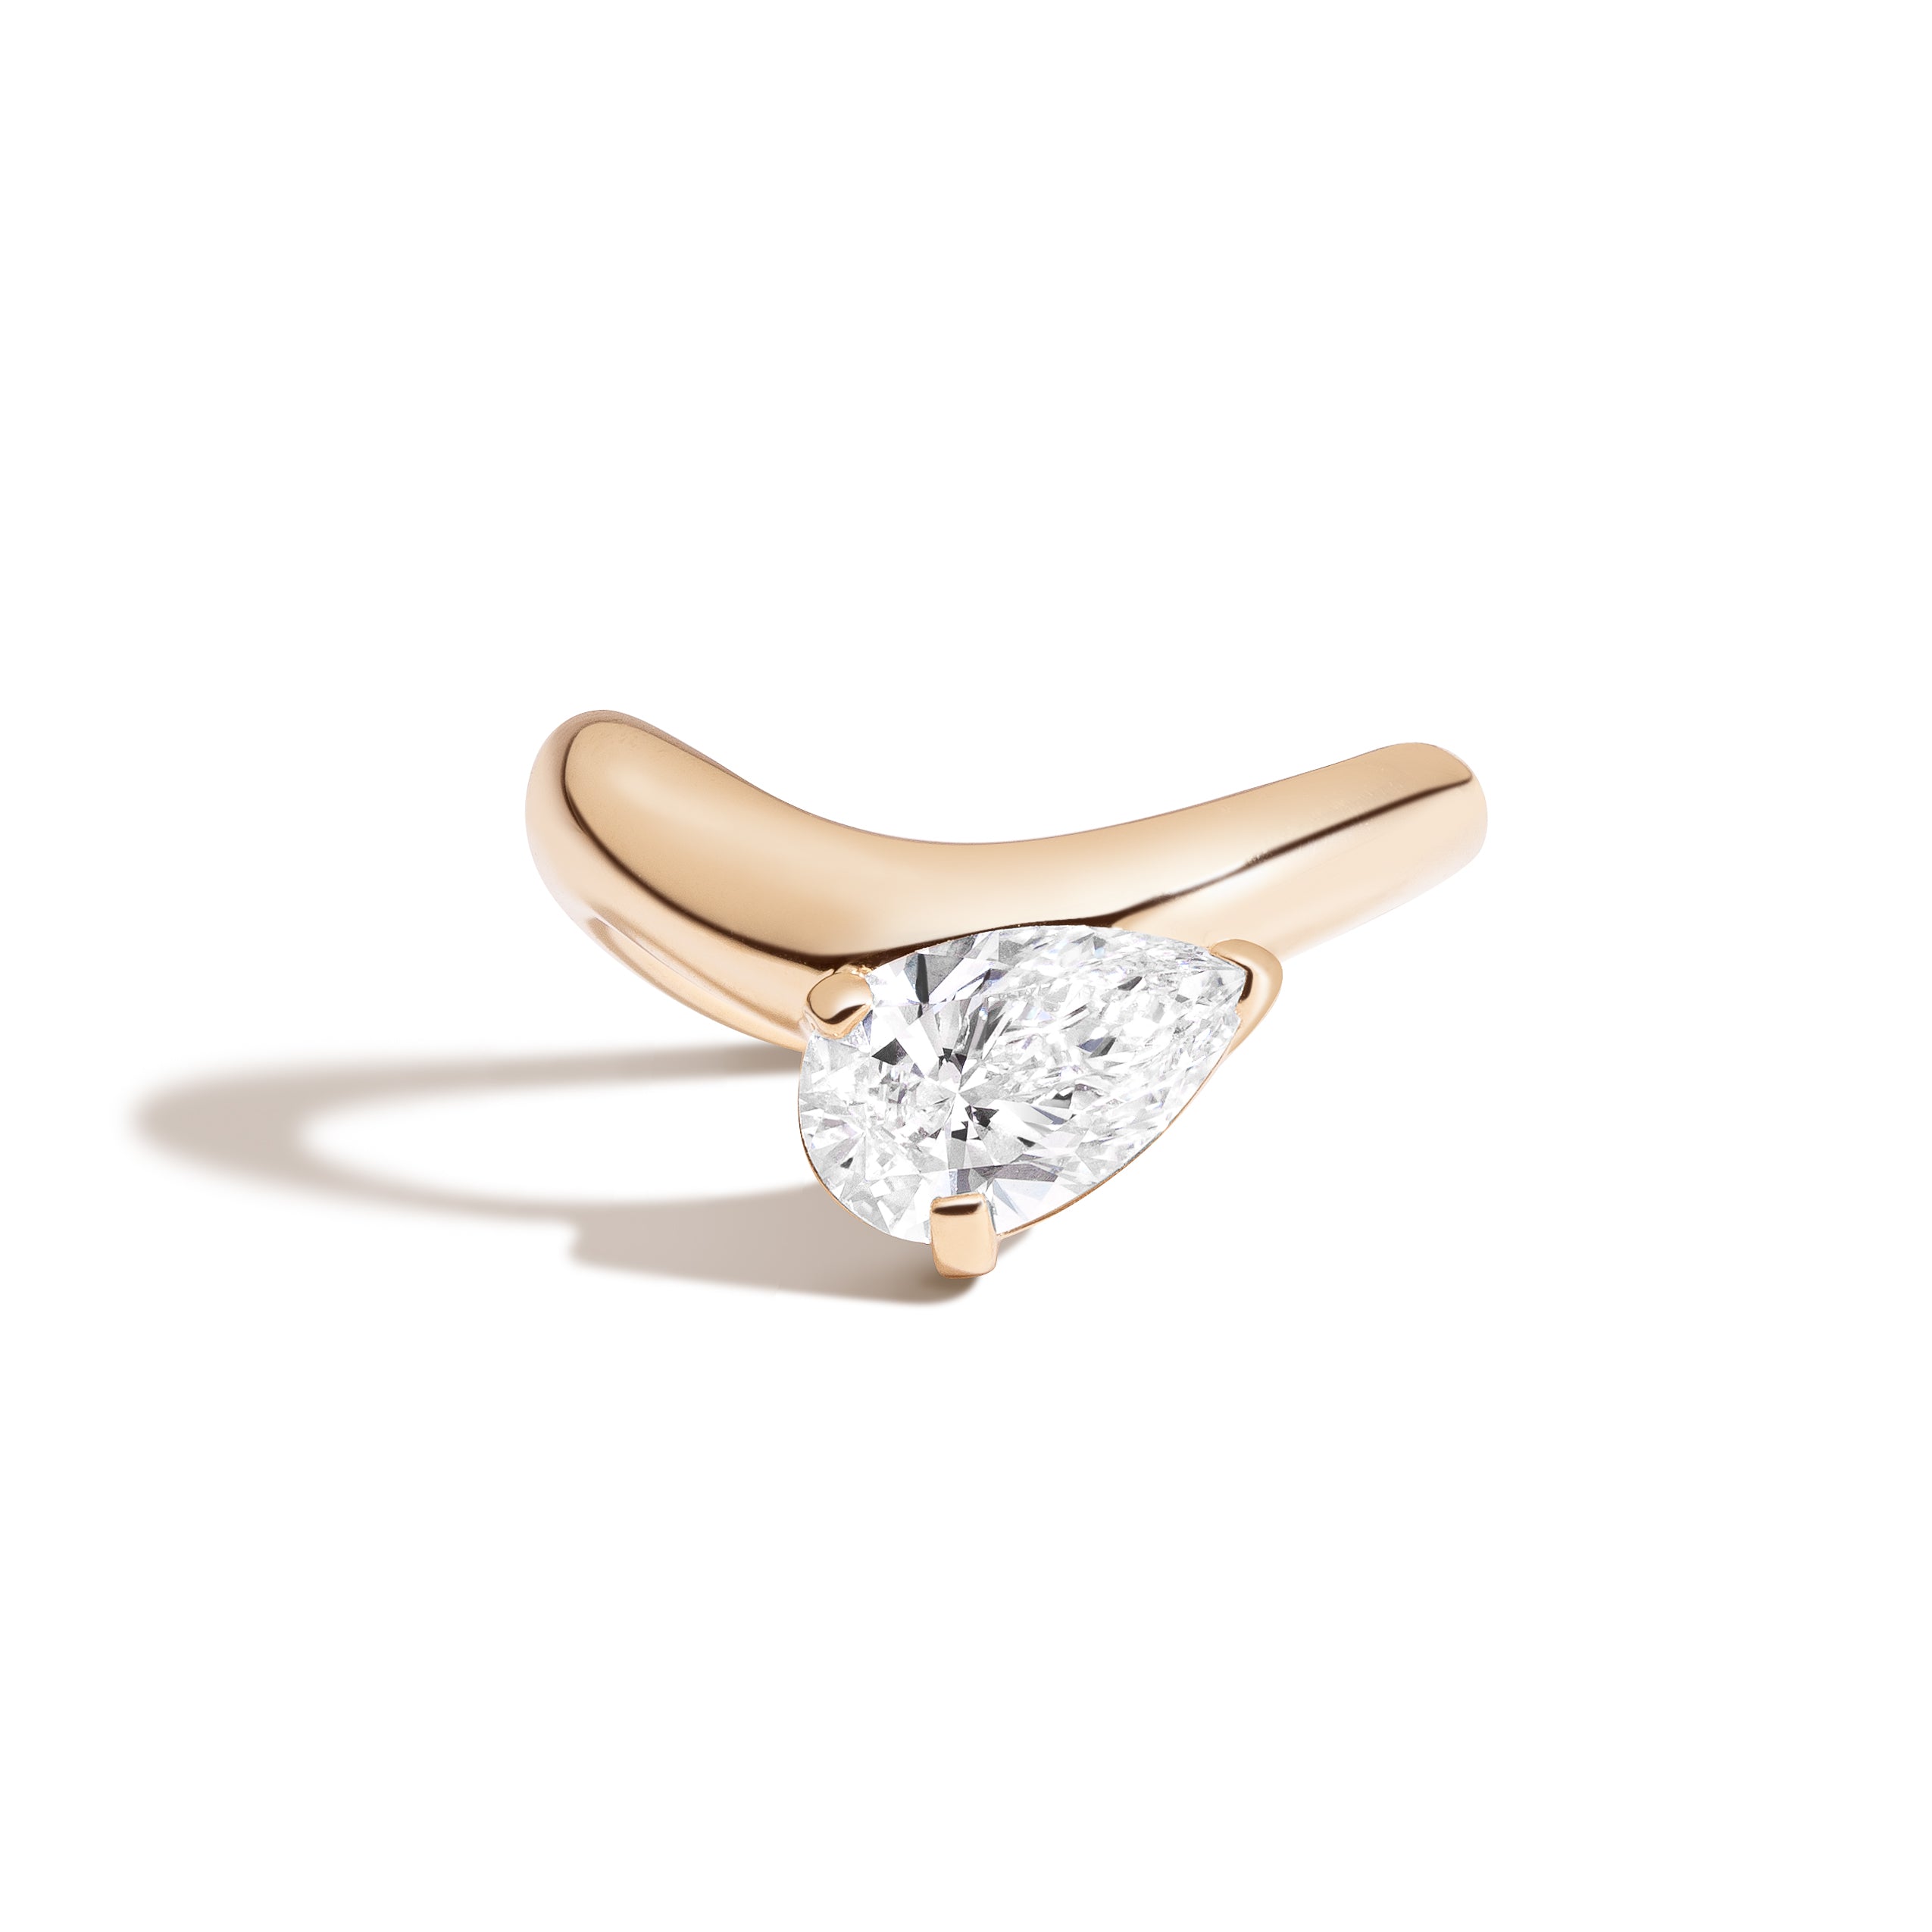 Shahla Karimi Cloud Collection Offset Pear Ring 14K Yellow Gold